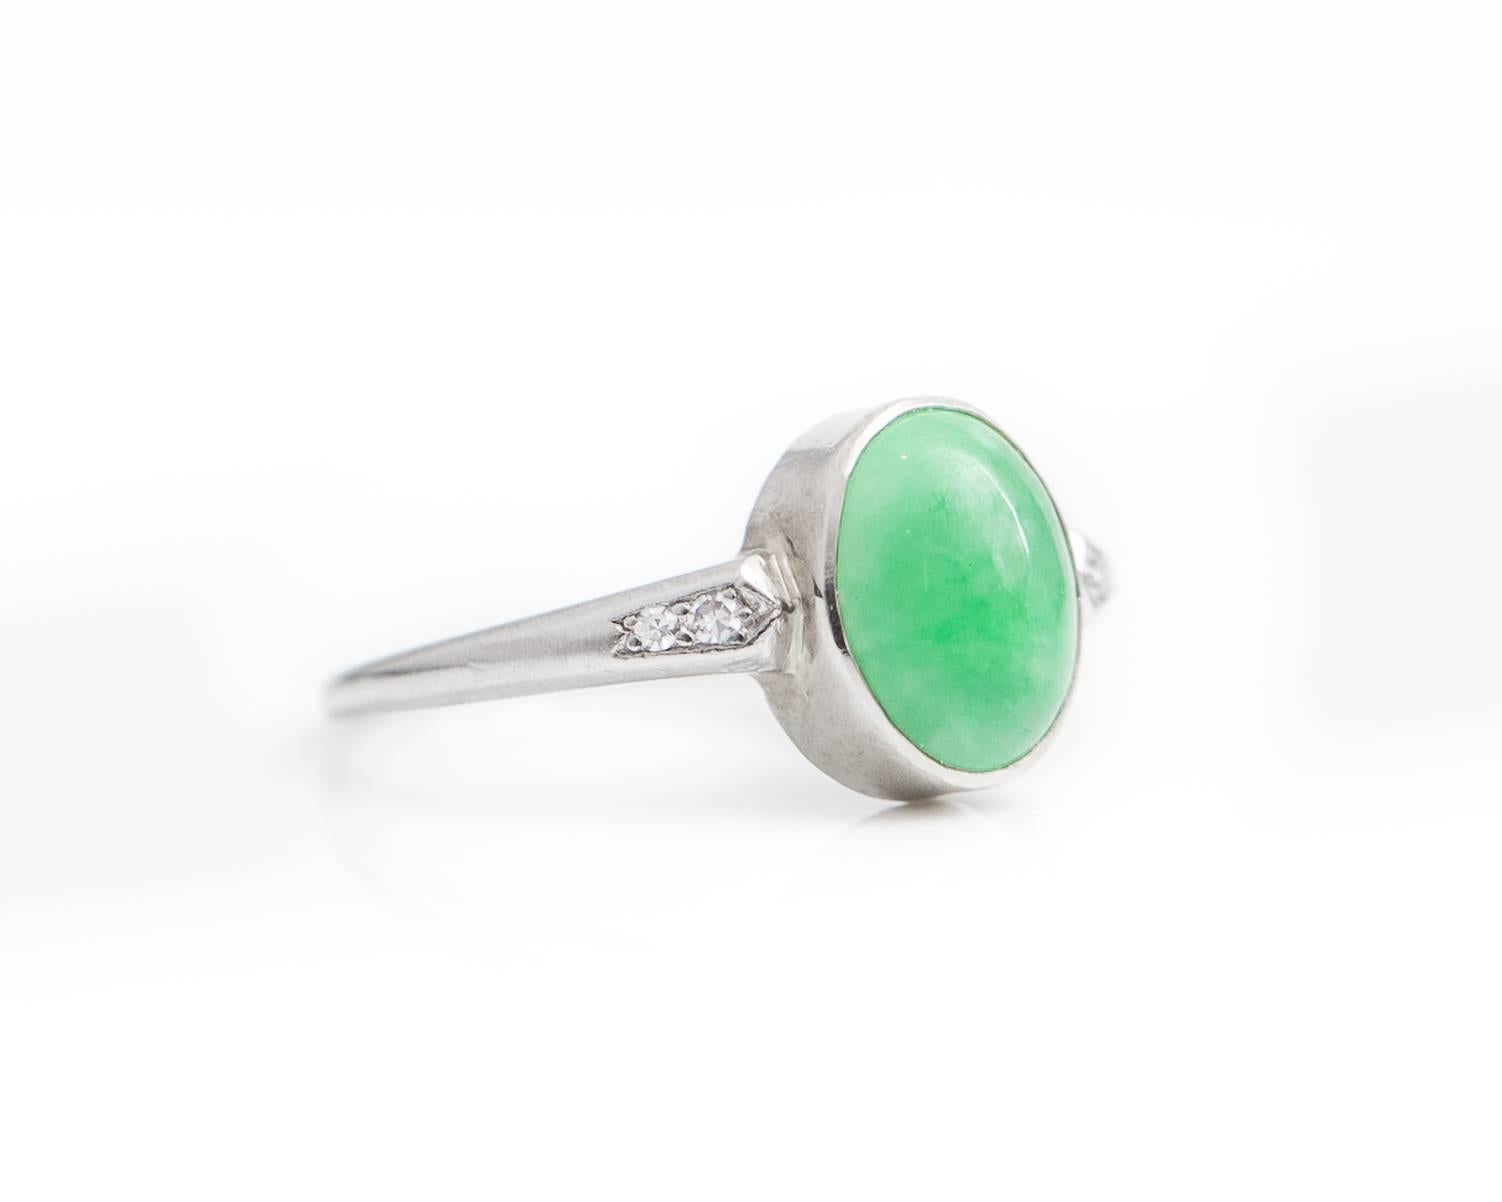 1930s Art Deco Oval Jade Cabochon with Diamond and Platinum Ring. Features a bezel set 1.0 carat Oval Jade Cabochon with 2 prong set Single Cut Round Diamonds on each side. The Candy Apple Green Jade Cabochon has minor, naturally occurring